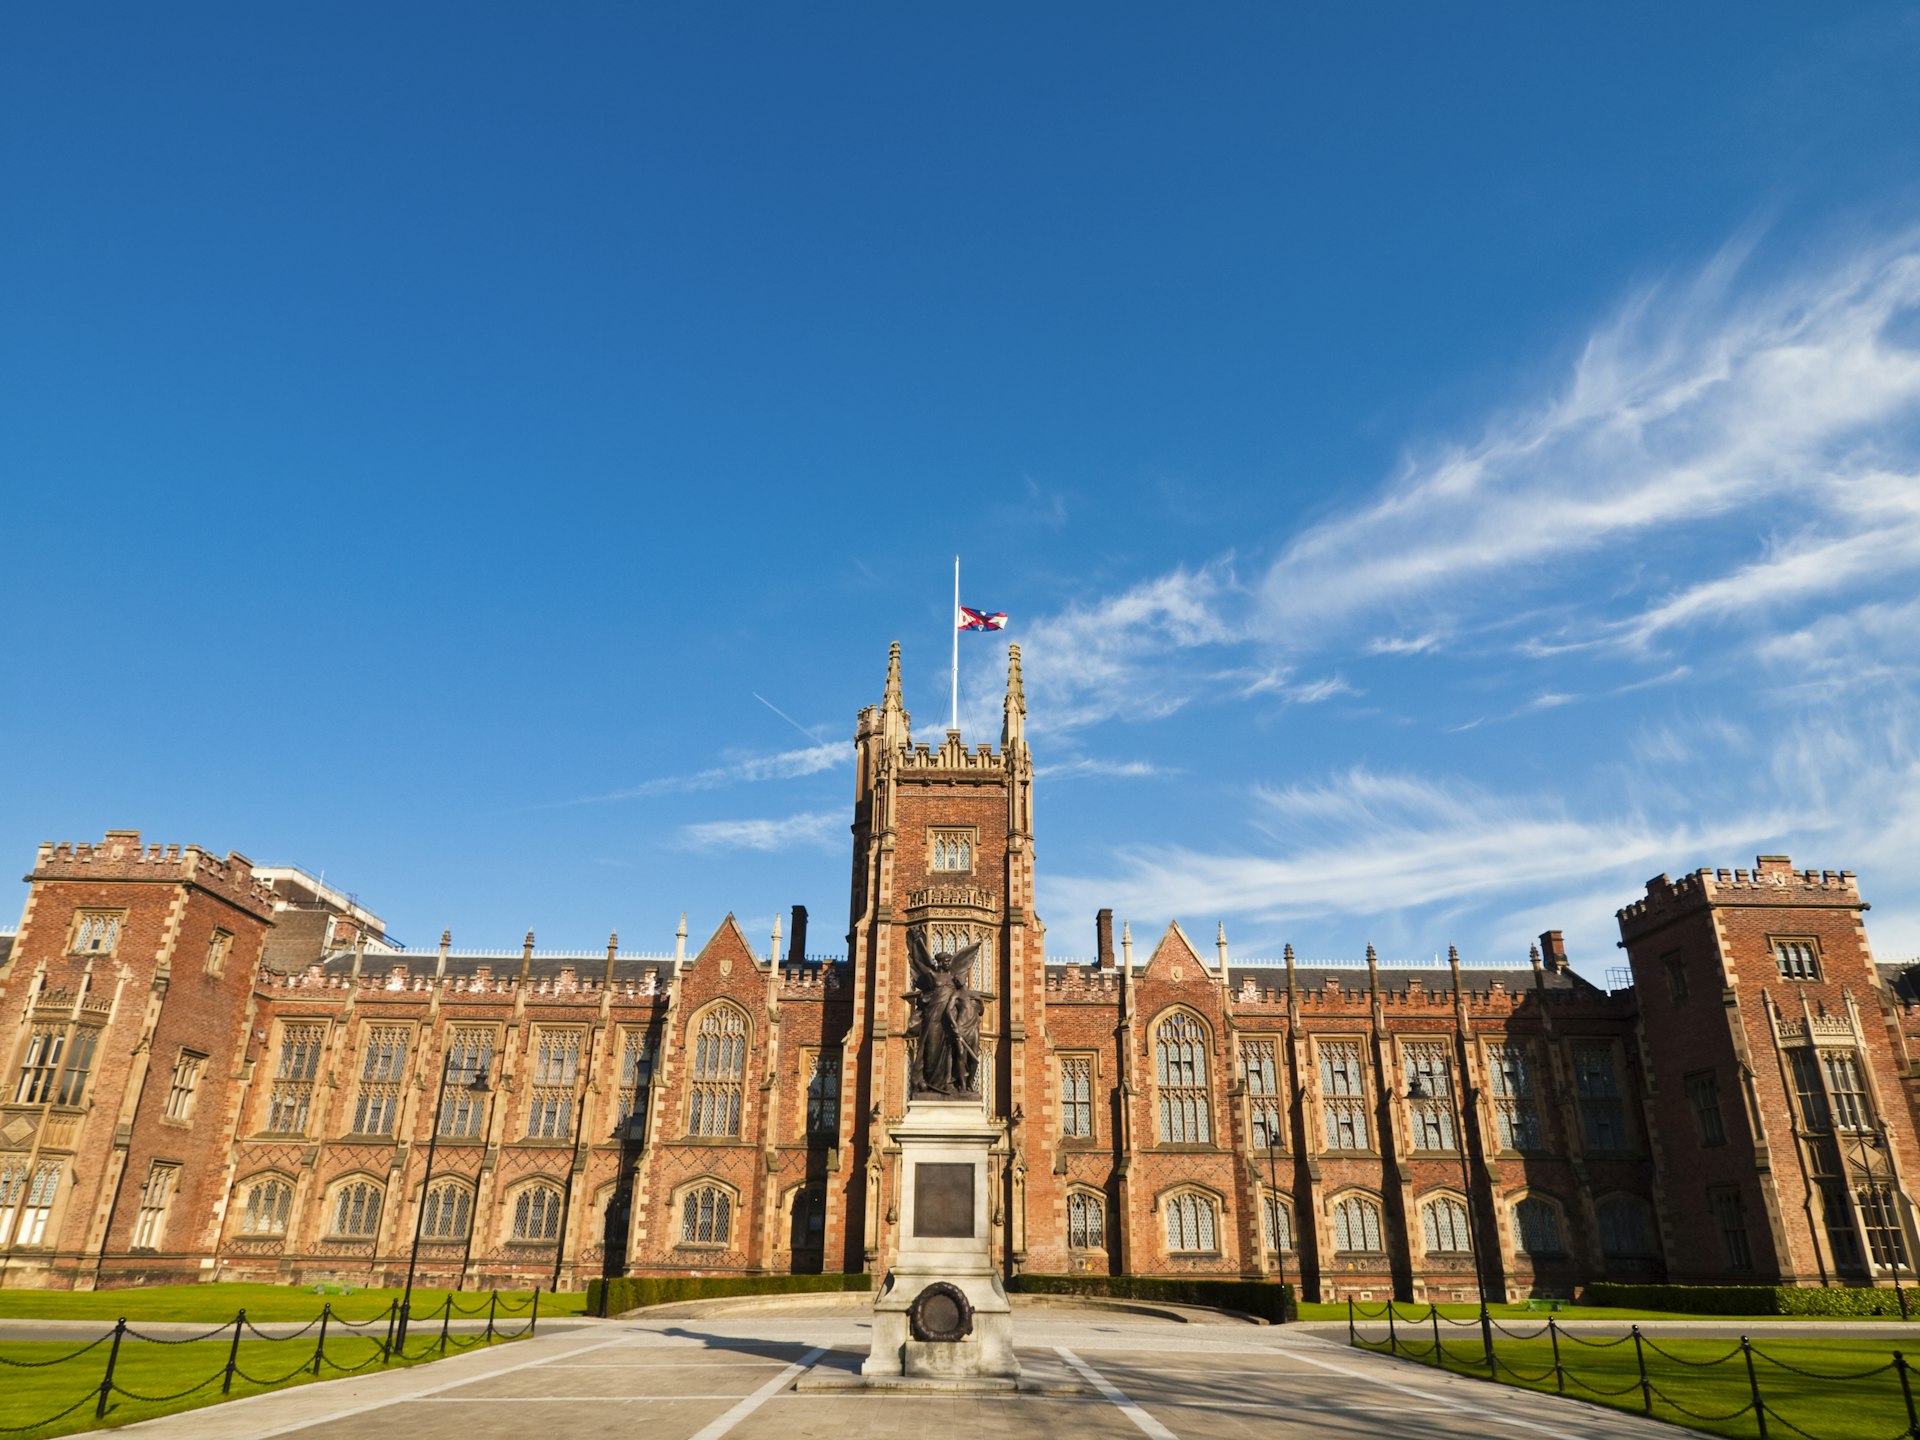 A view of the Gothic frontage of the main building at Queen's University, Belfast, with blue skies above.